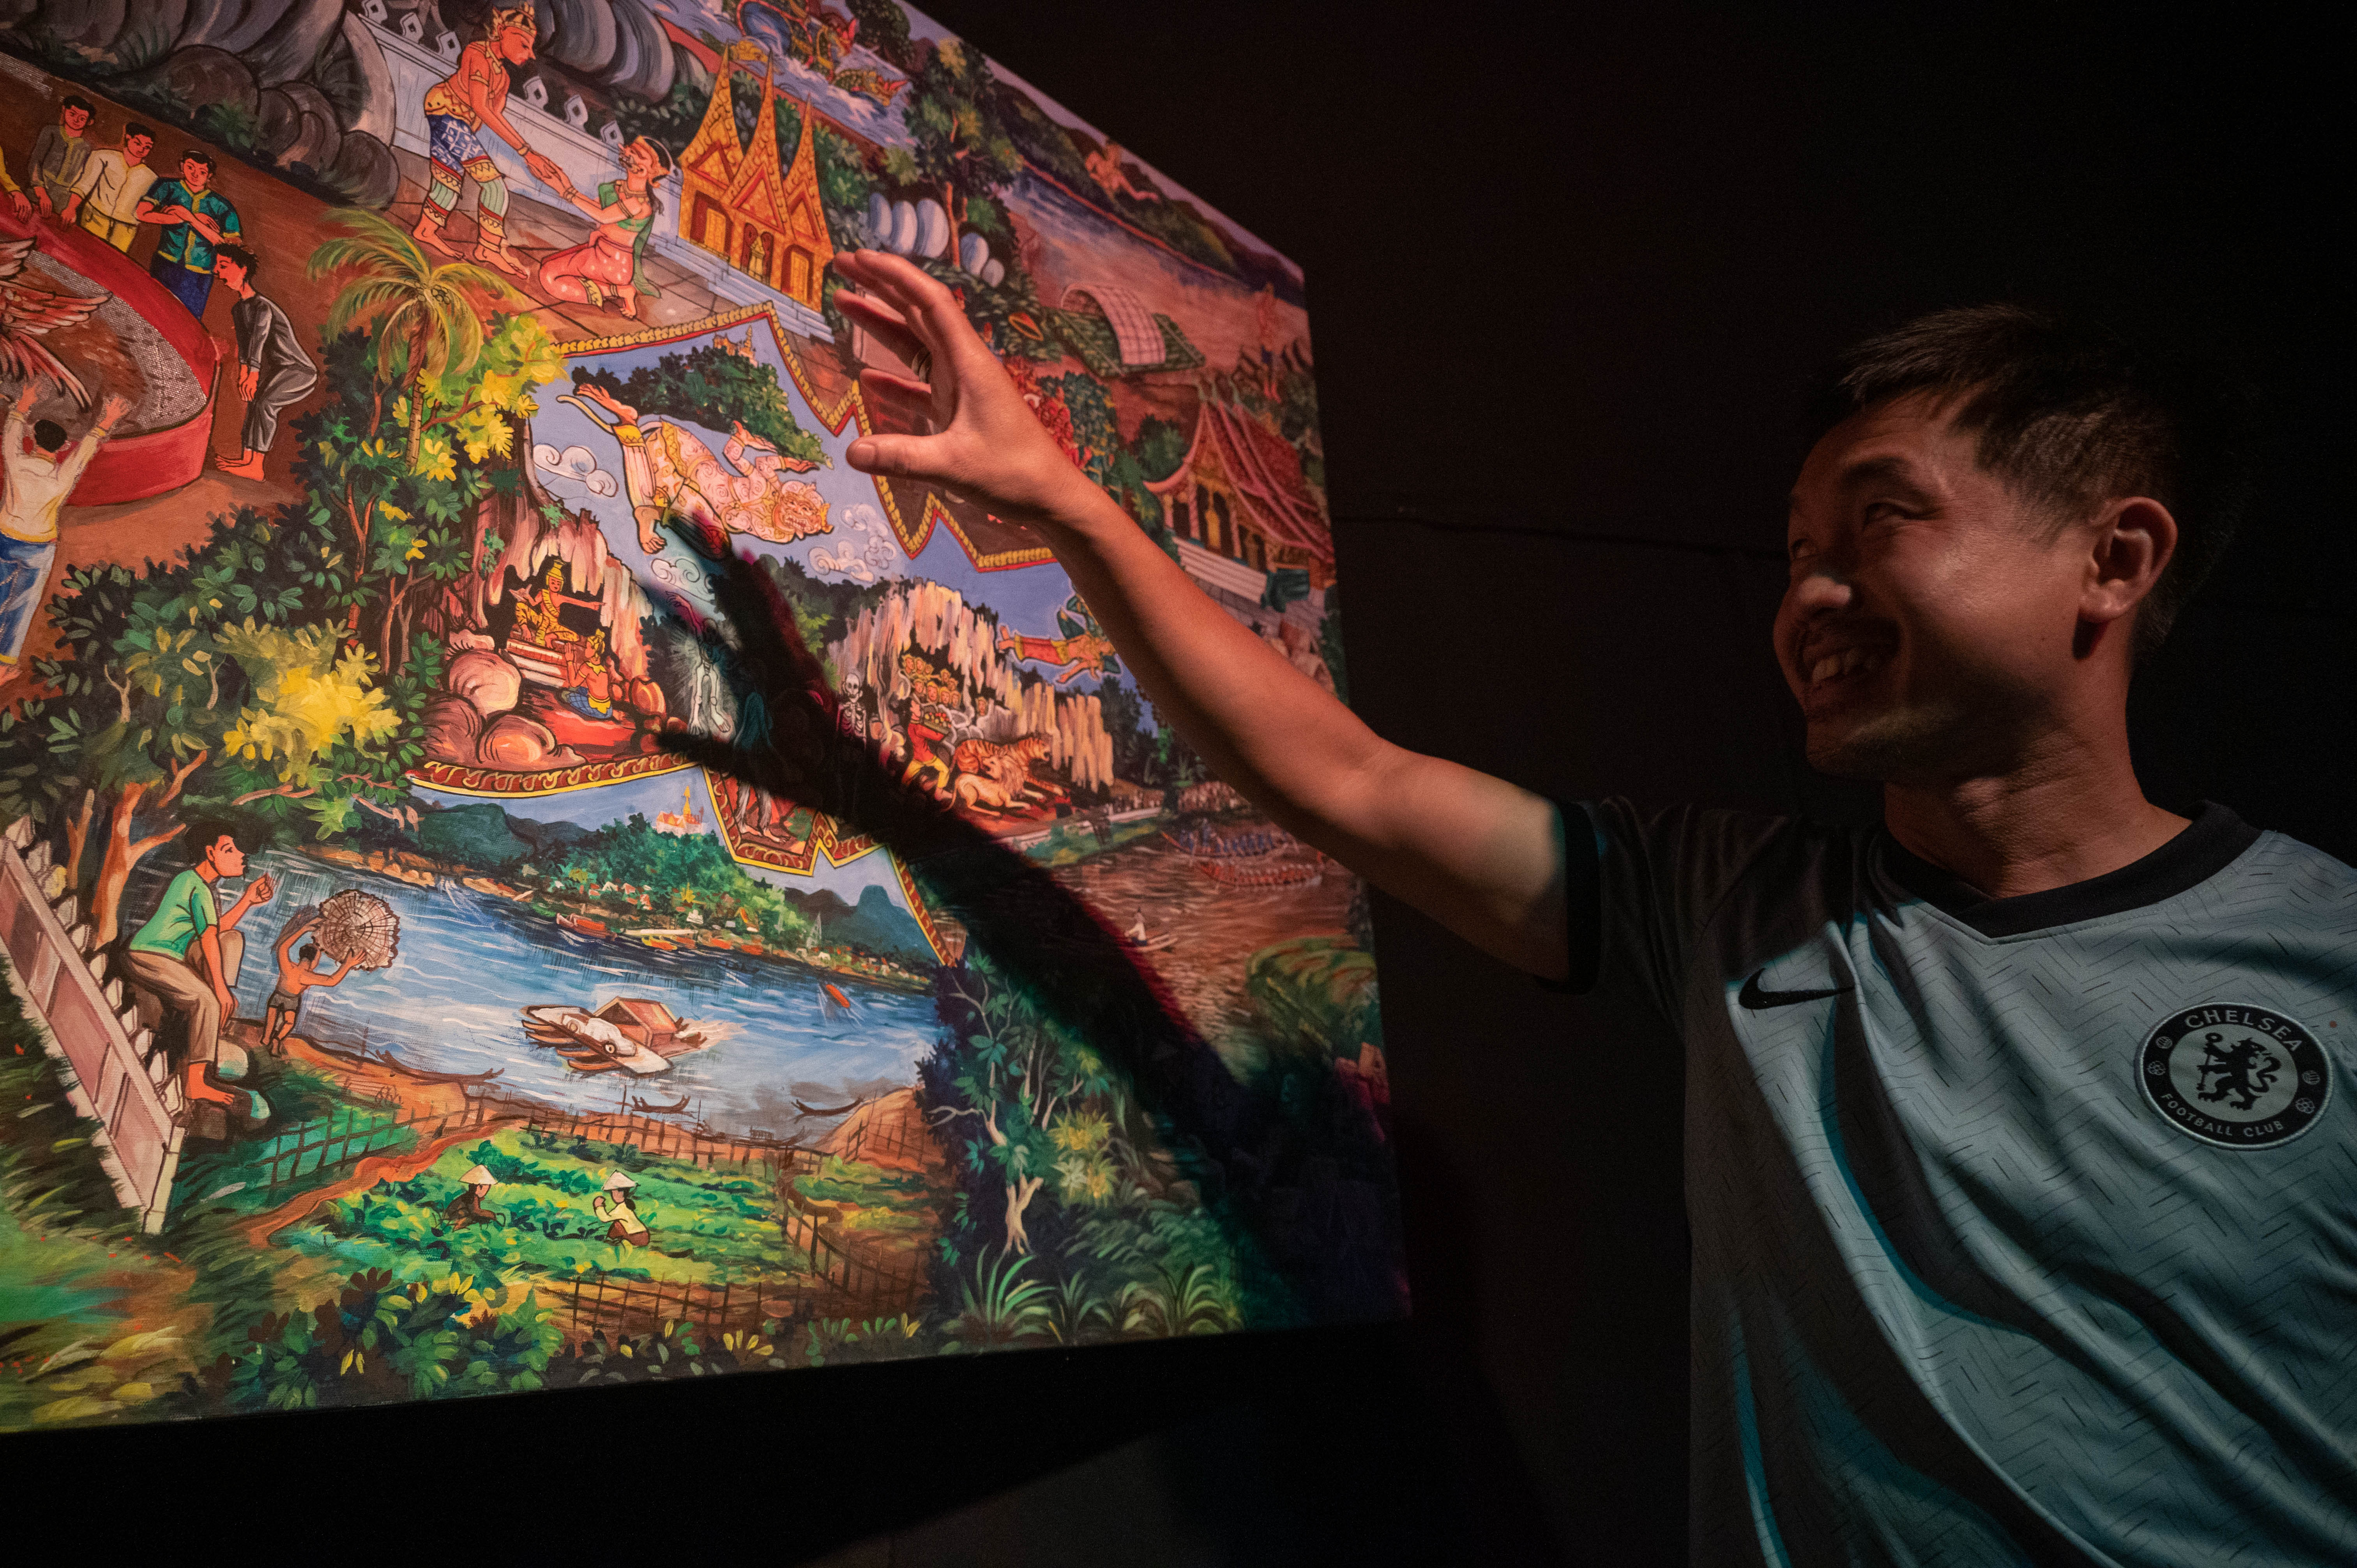 A hand-crafted painting forms the backdrop of Garavek’s stage, giving the audience a glimpse of the stories told during the performance.